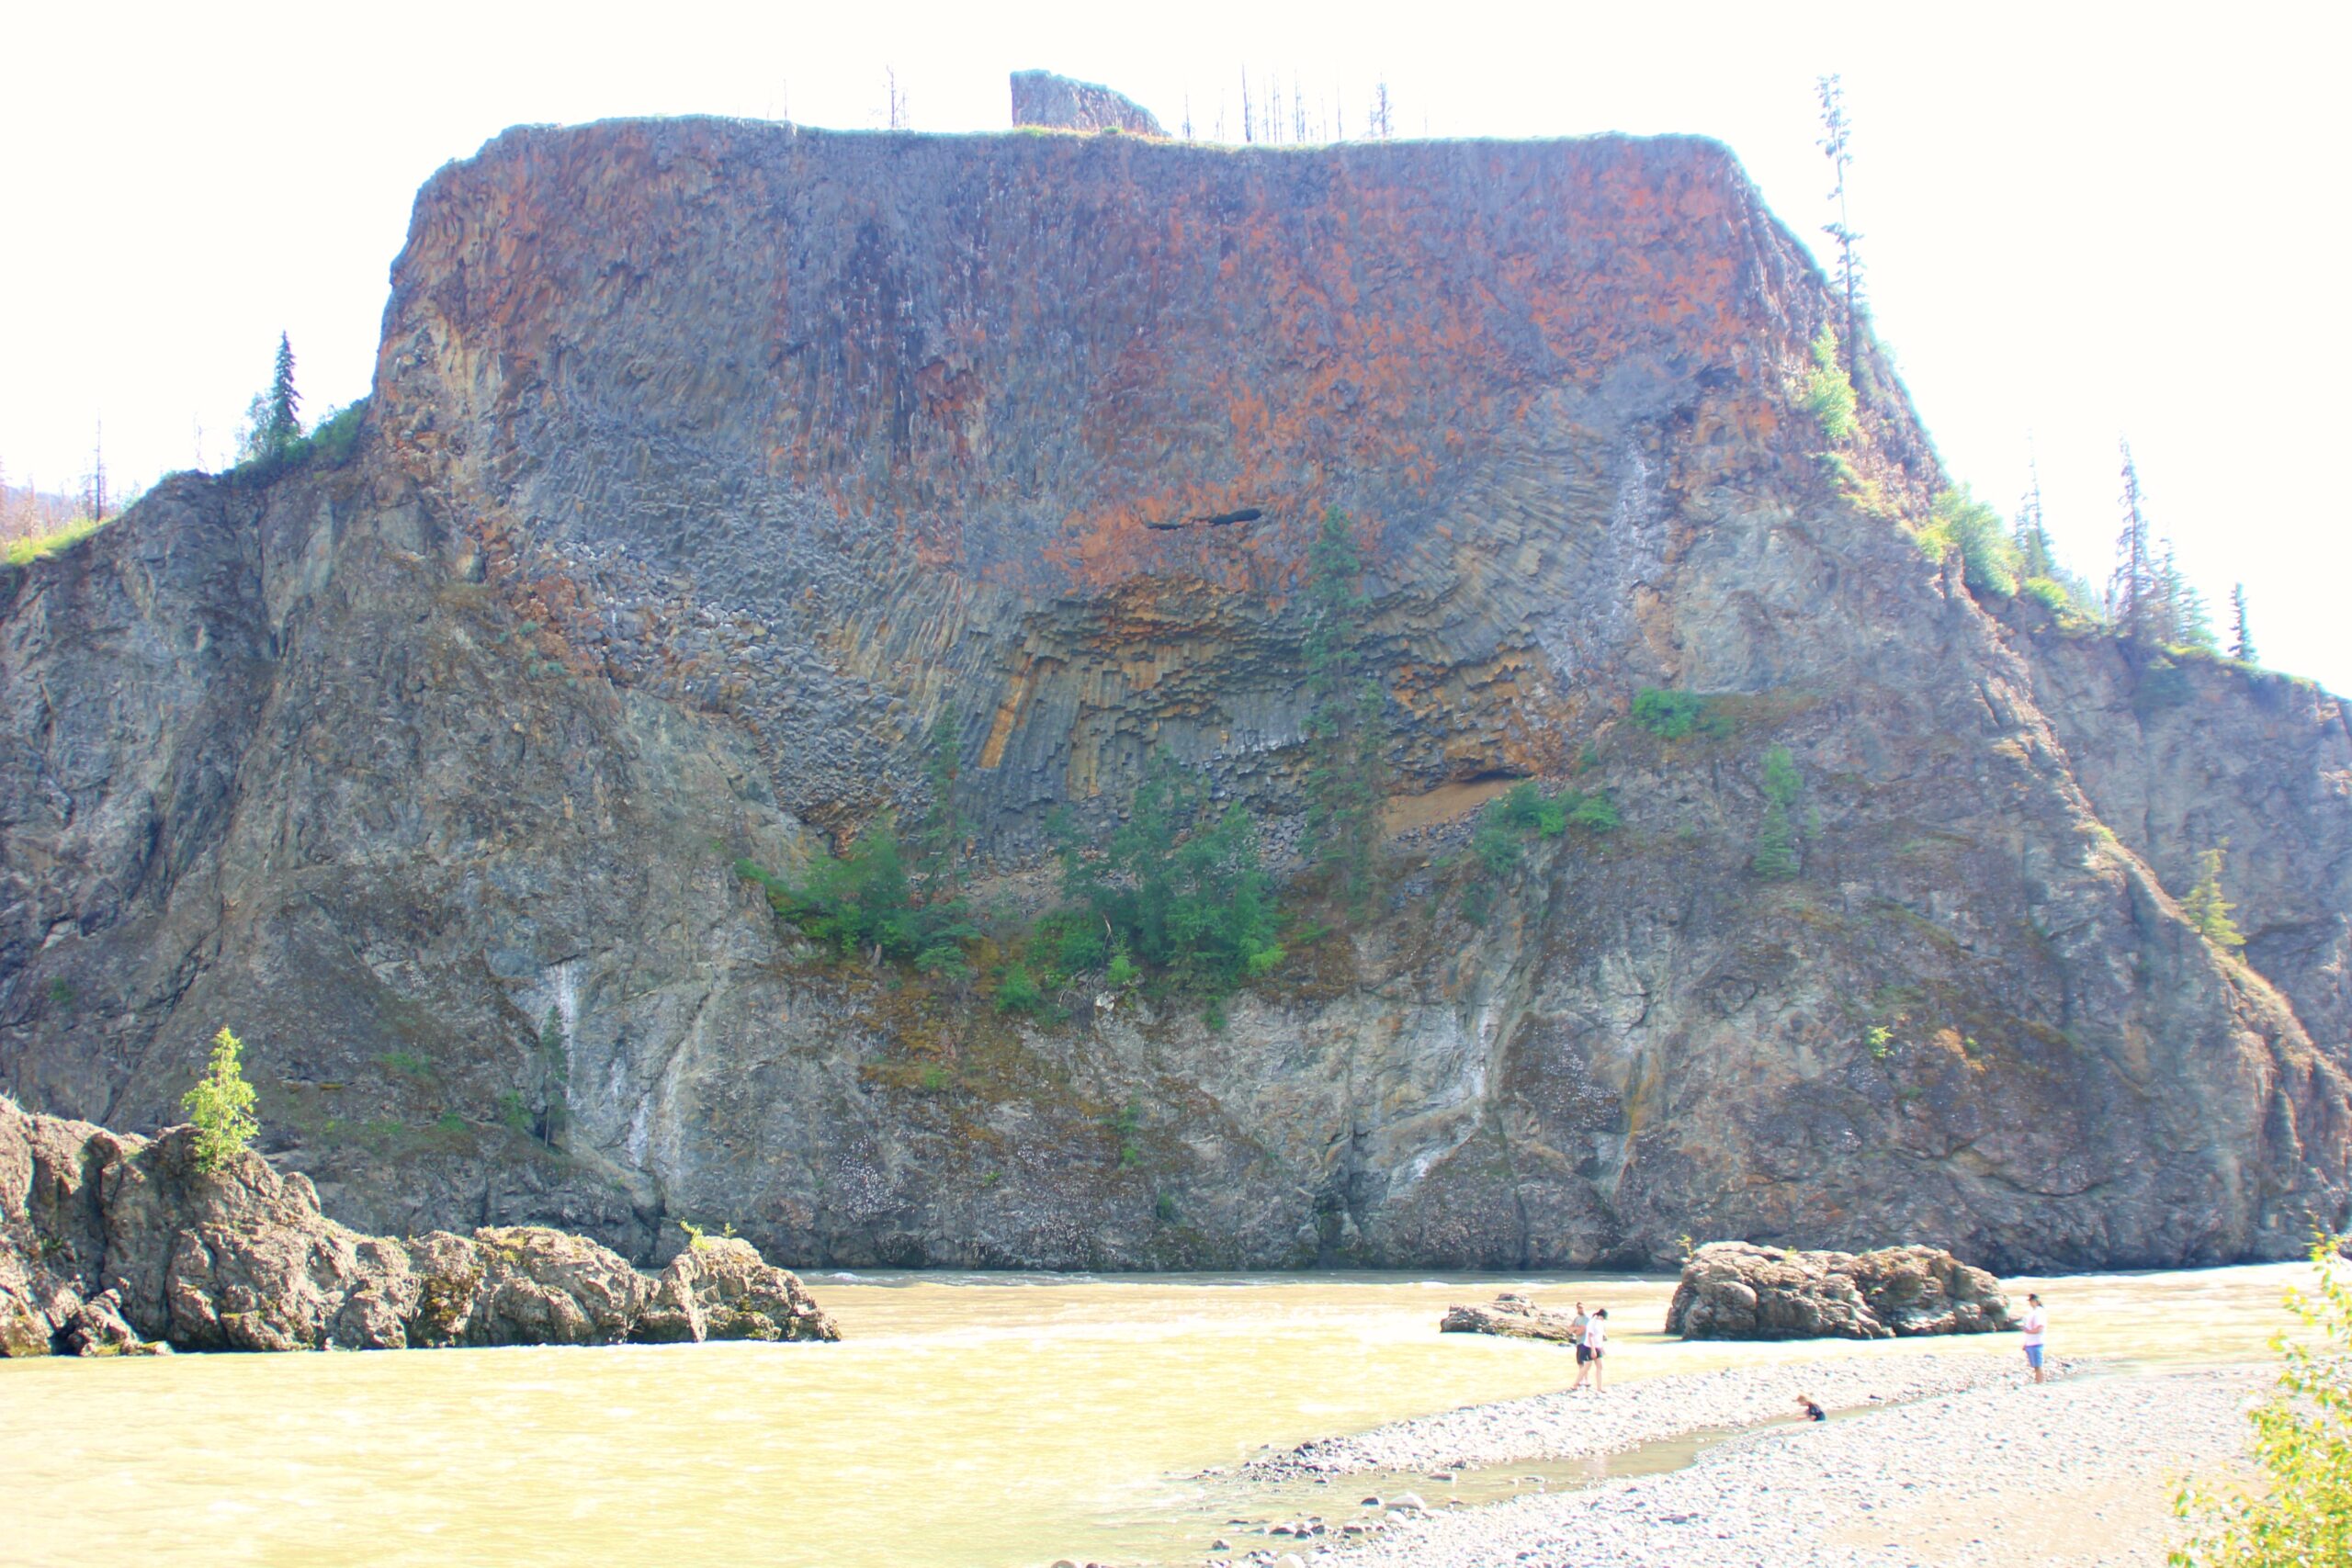 Tsadu, the #1 Most Photographed Rock Formation in the Tahltan Highlands